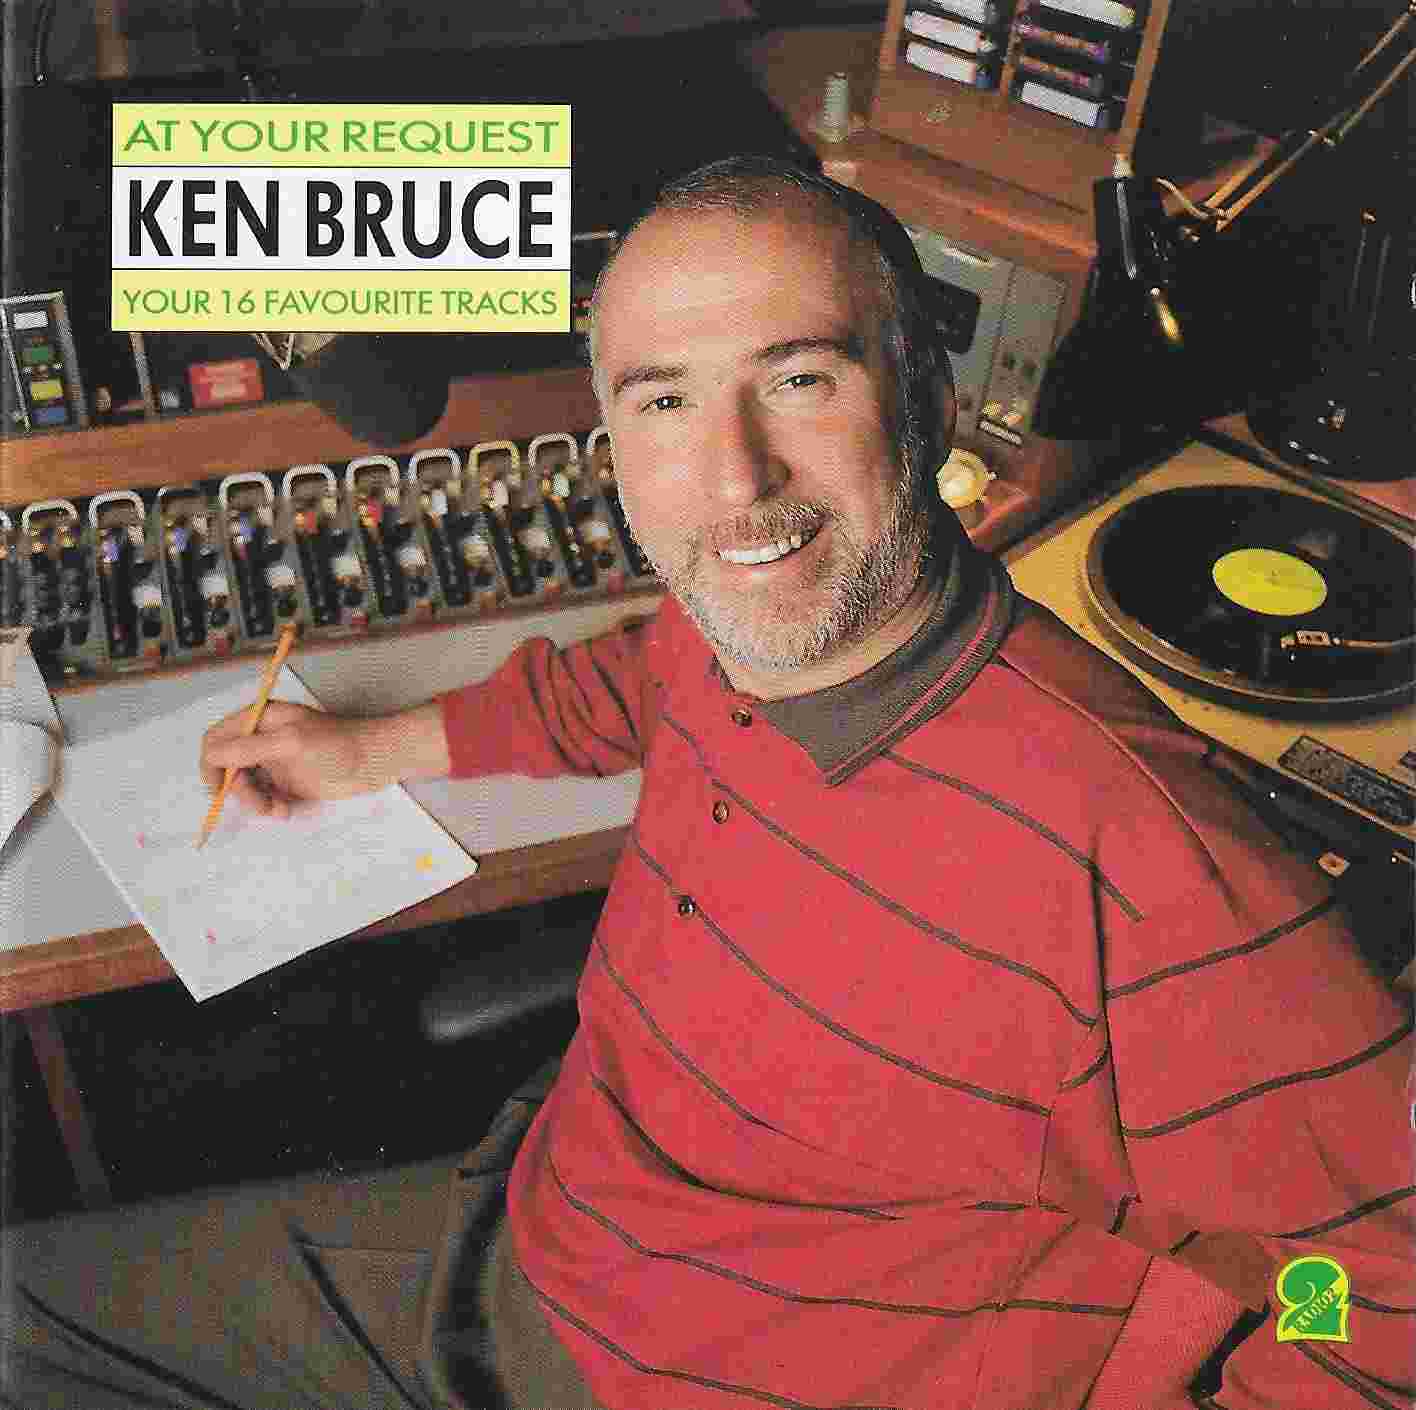 Picture of At your request - Ken Bruce by artist Ken Bruce from the BBC cds - Records and Tapes library